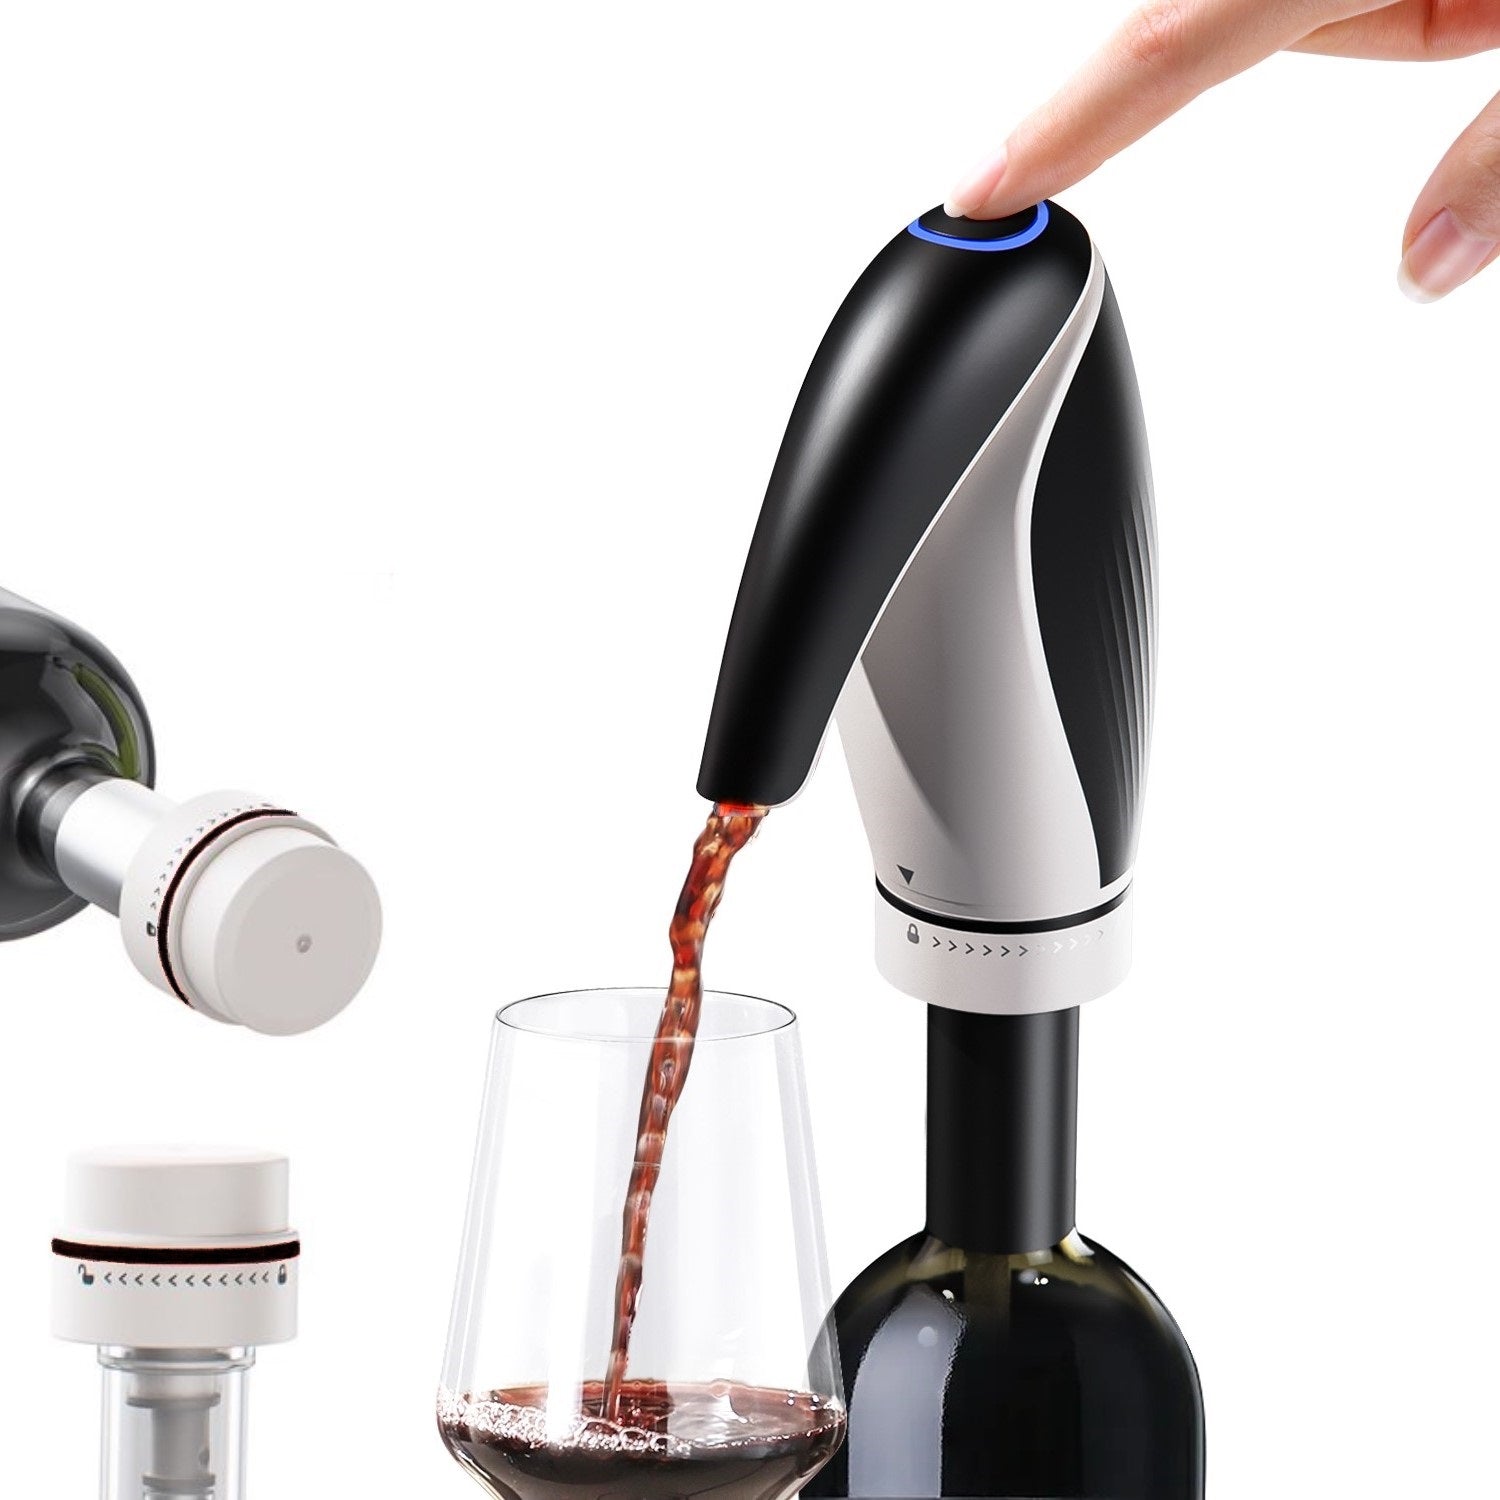 All-in-One Rechargeable Wine Decanter with Aerator and Preserver - Black, 1000pcs